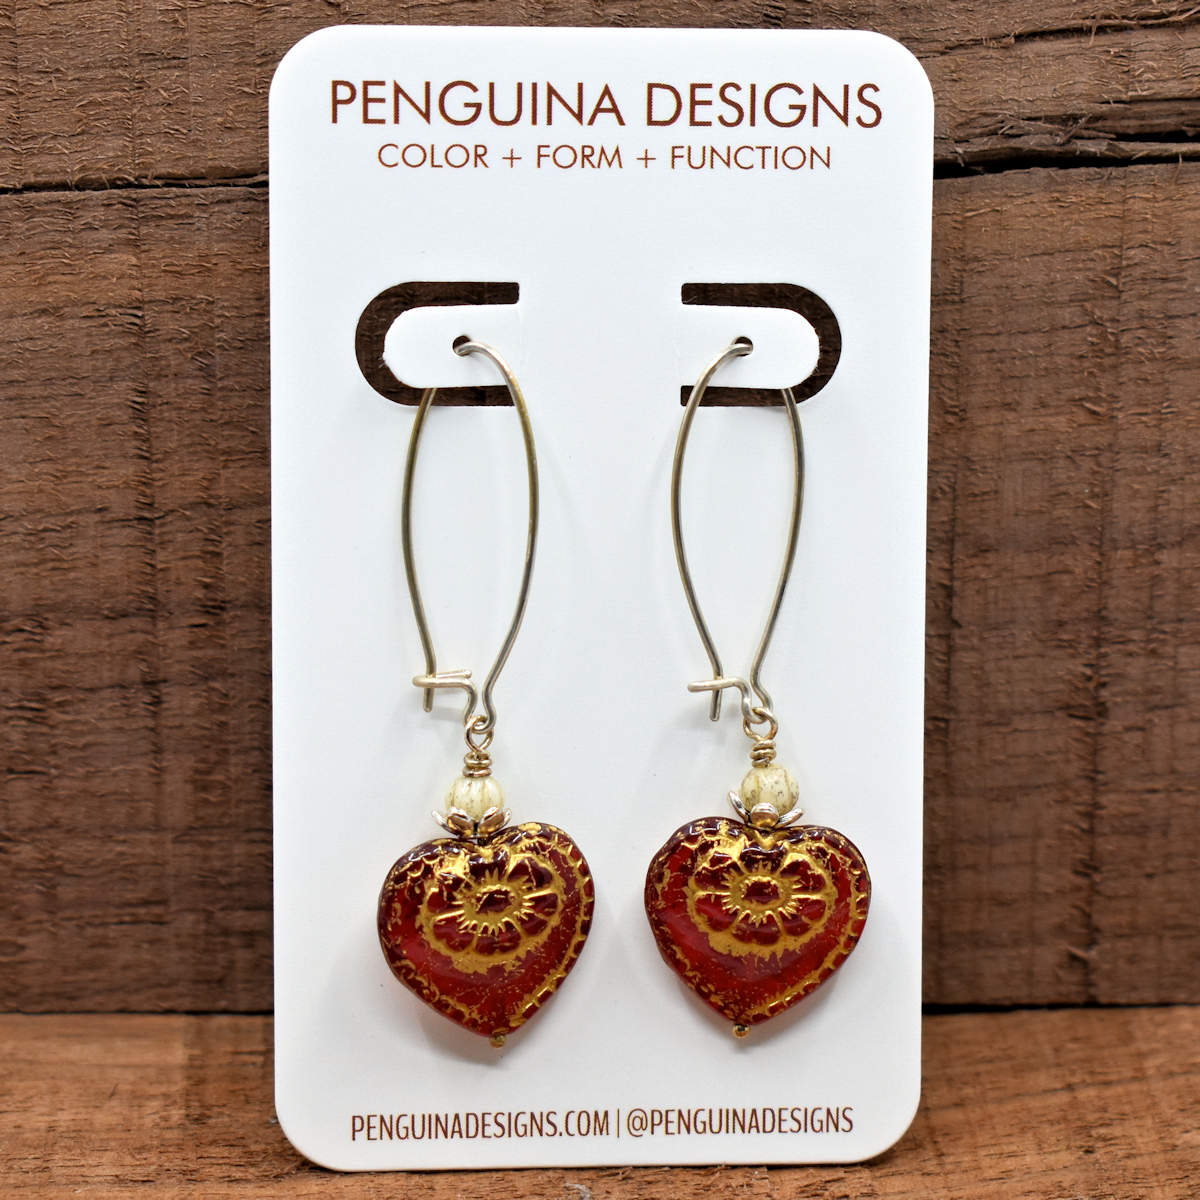 A pair of earrings on a white card rest against a wood background. The earrings have long silver oval wires that latch and red hearts at the bottom that are embossed with a gold flower design.